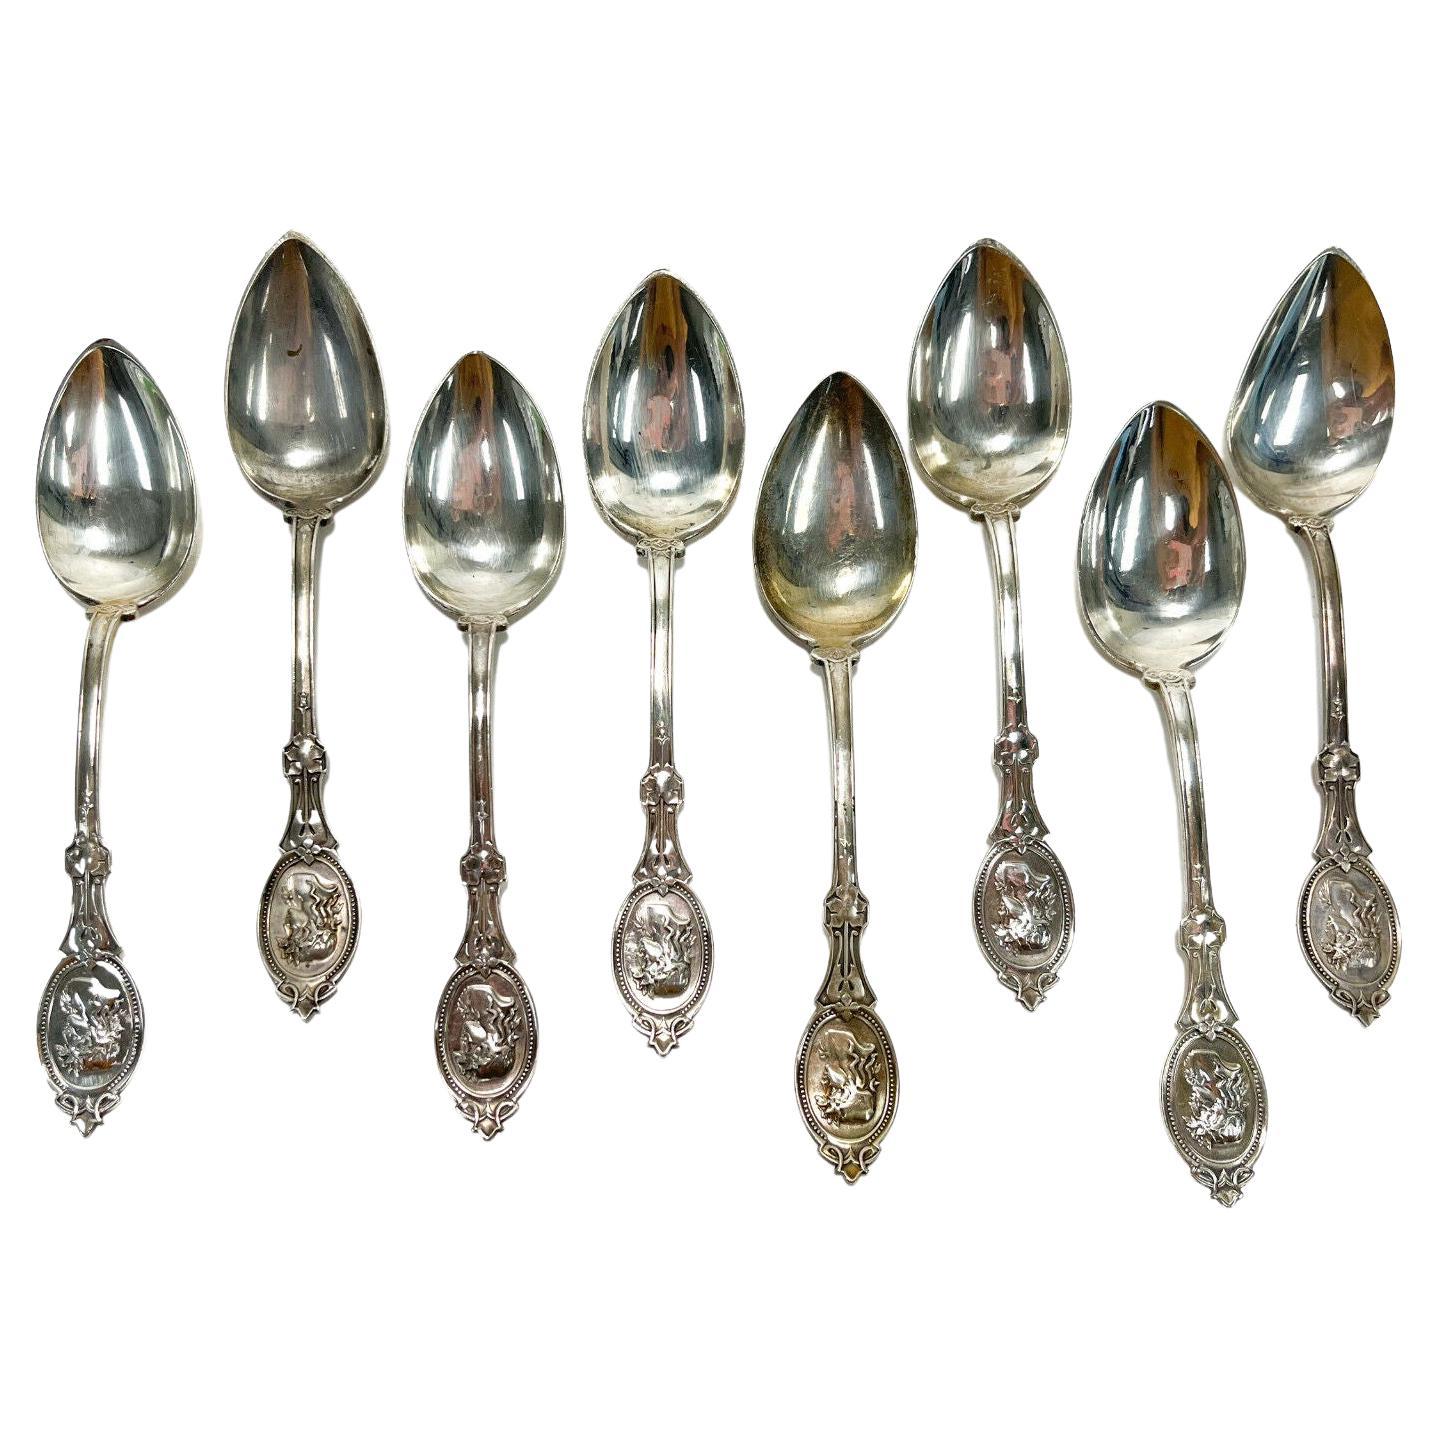 8 Hotchkiss & Schreuder Sterling Silver Medallion Grapefruit Spoons, Late 19th C